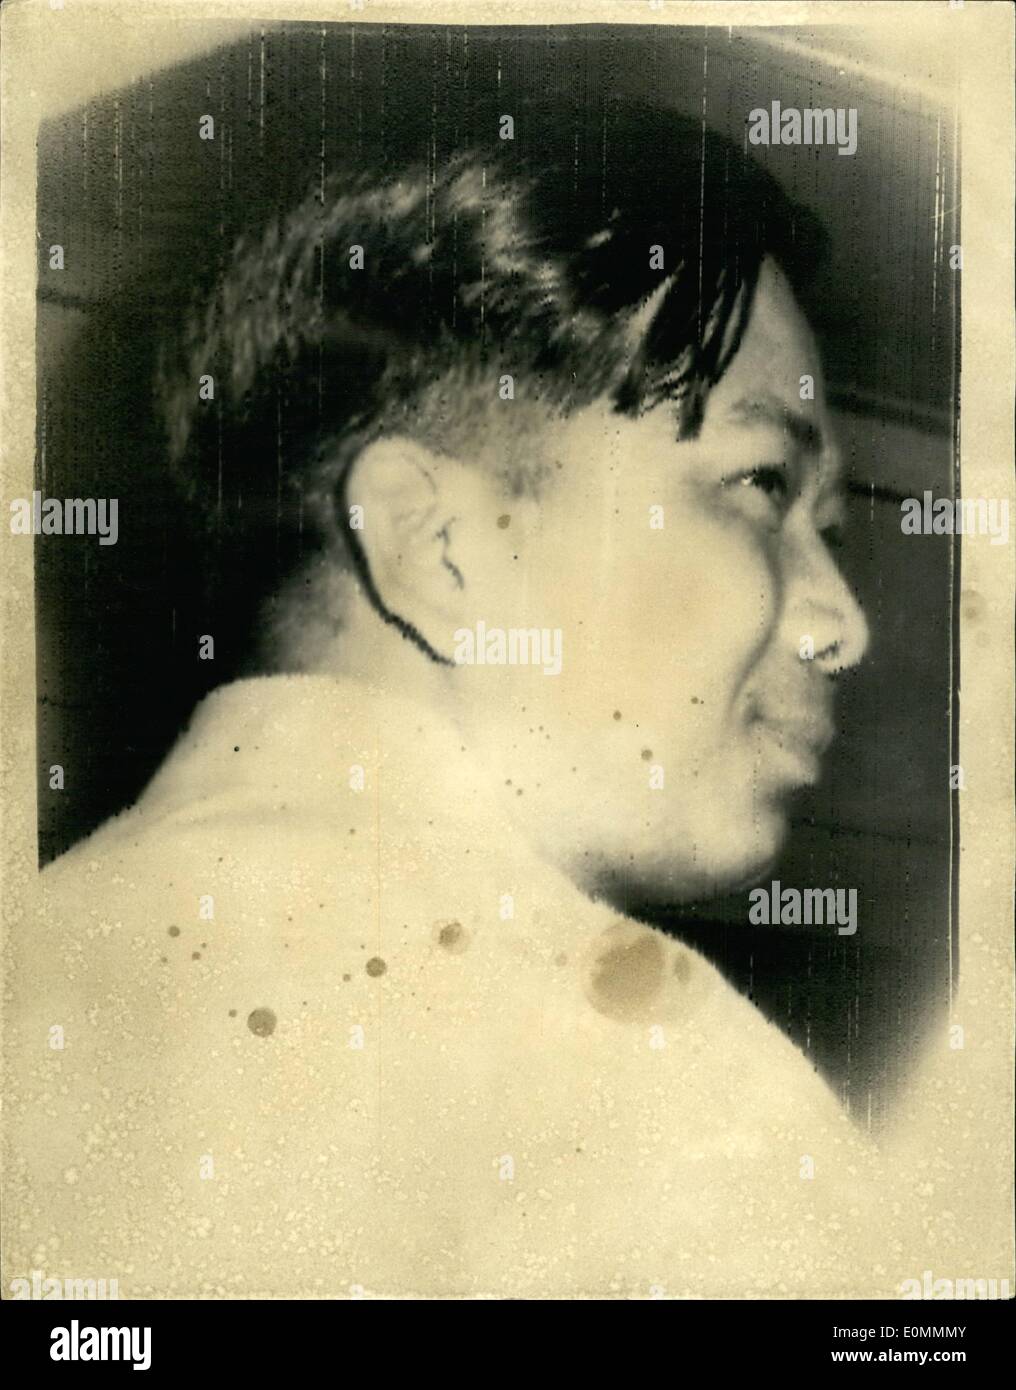 Dec. 12, 1955 - Malayan peace talks break down. Picture of Chin Peng - first Foreight years.: The Malayan peace talks broke down after Chin Peng, leader of 3,000 jungle Guerillas, told the Chief Ministers of Malaya and Singapore: '' We will never accept surrender at any time and we will continue to struggle to the last man. the talks, which took place at Baling, Malaya, were between Chin Peng and Tengku Abdul Rahman, the Malayan Chief Minister, and Mr. David Marshall, the Singapore Chief Minister Stock Photo